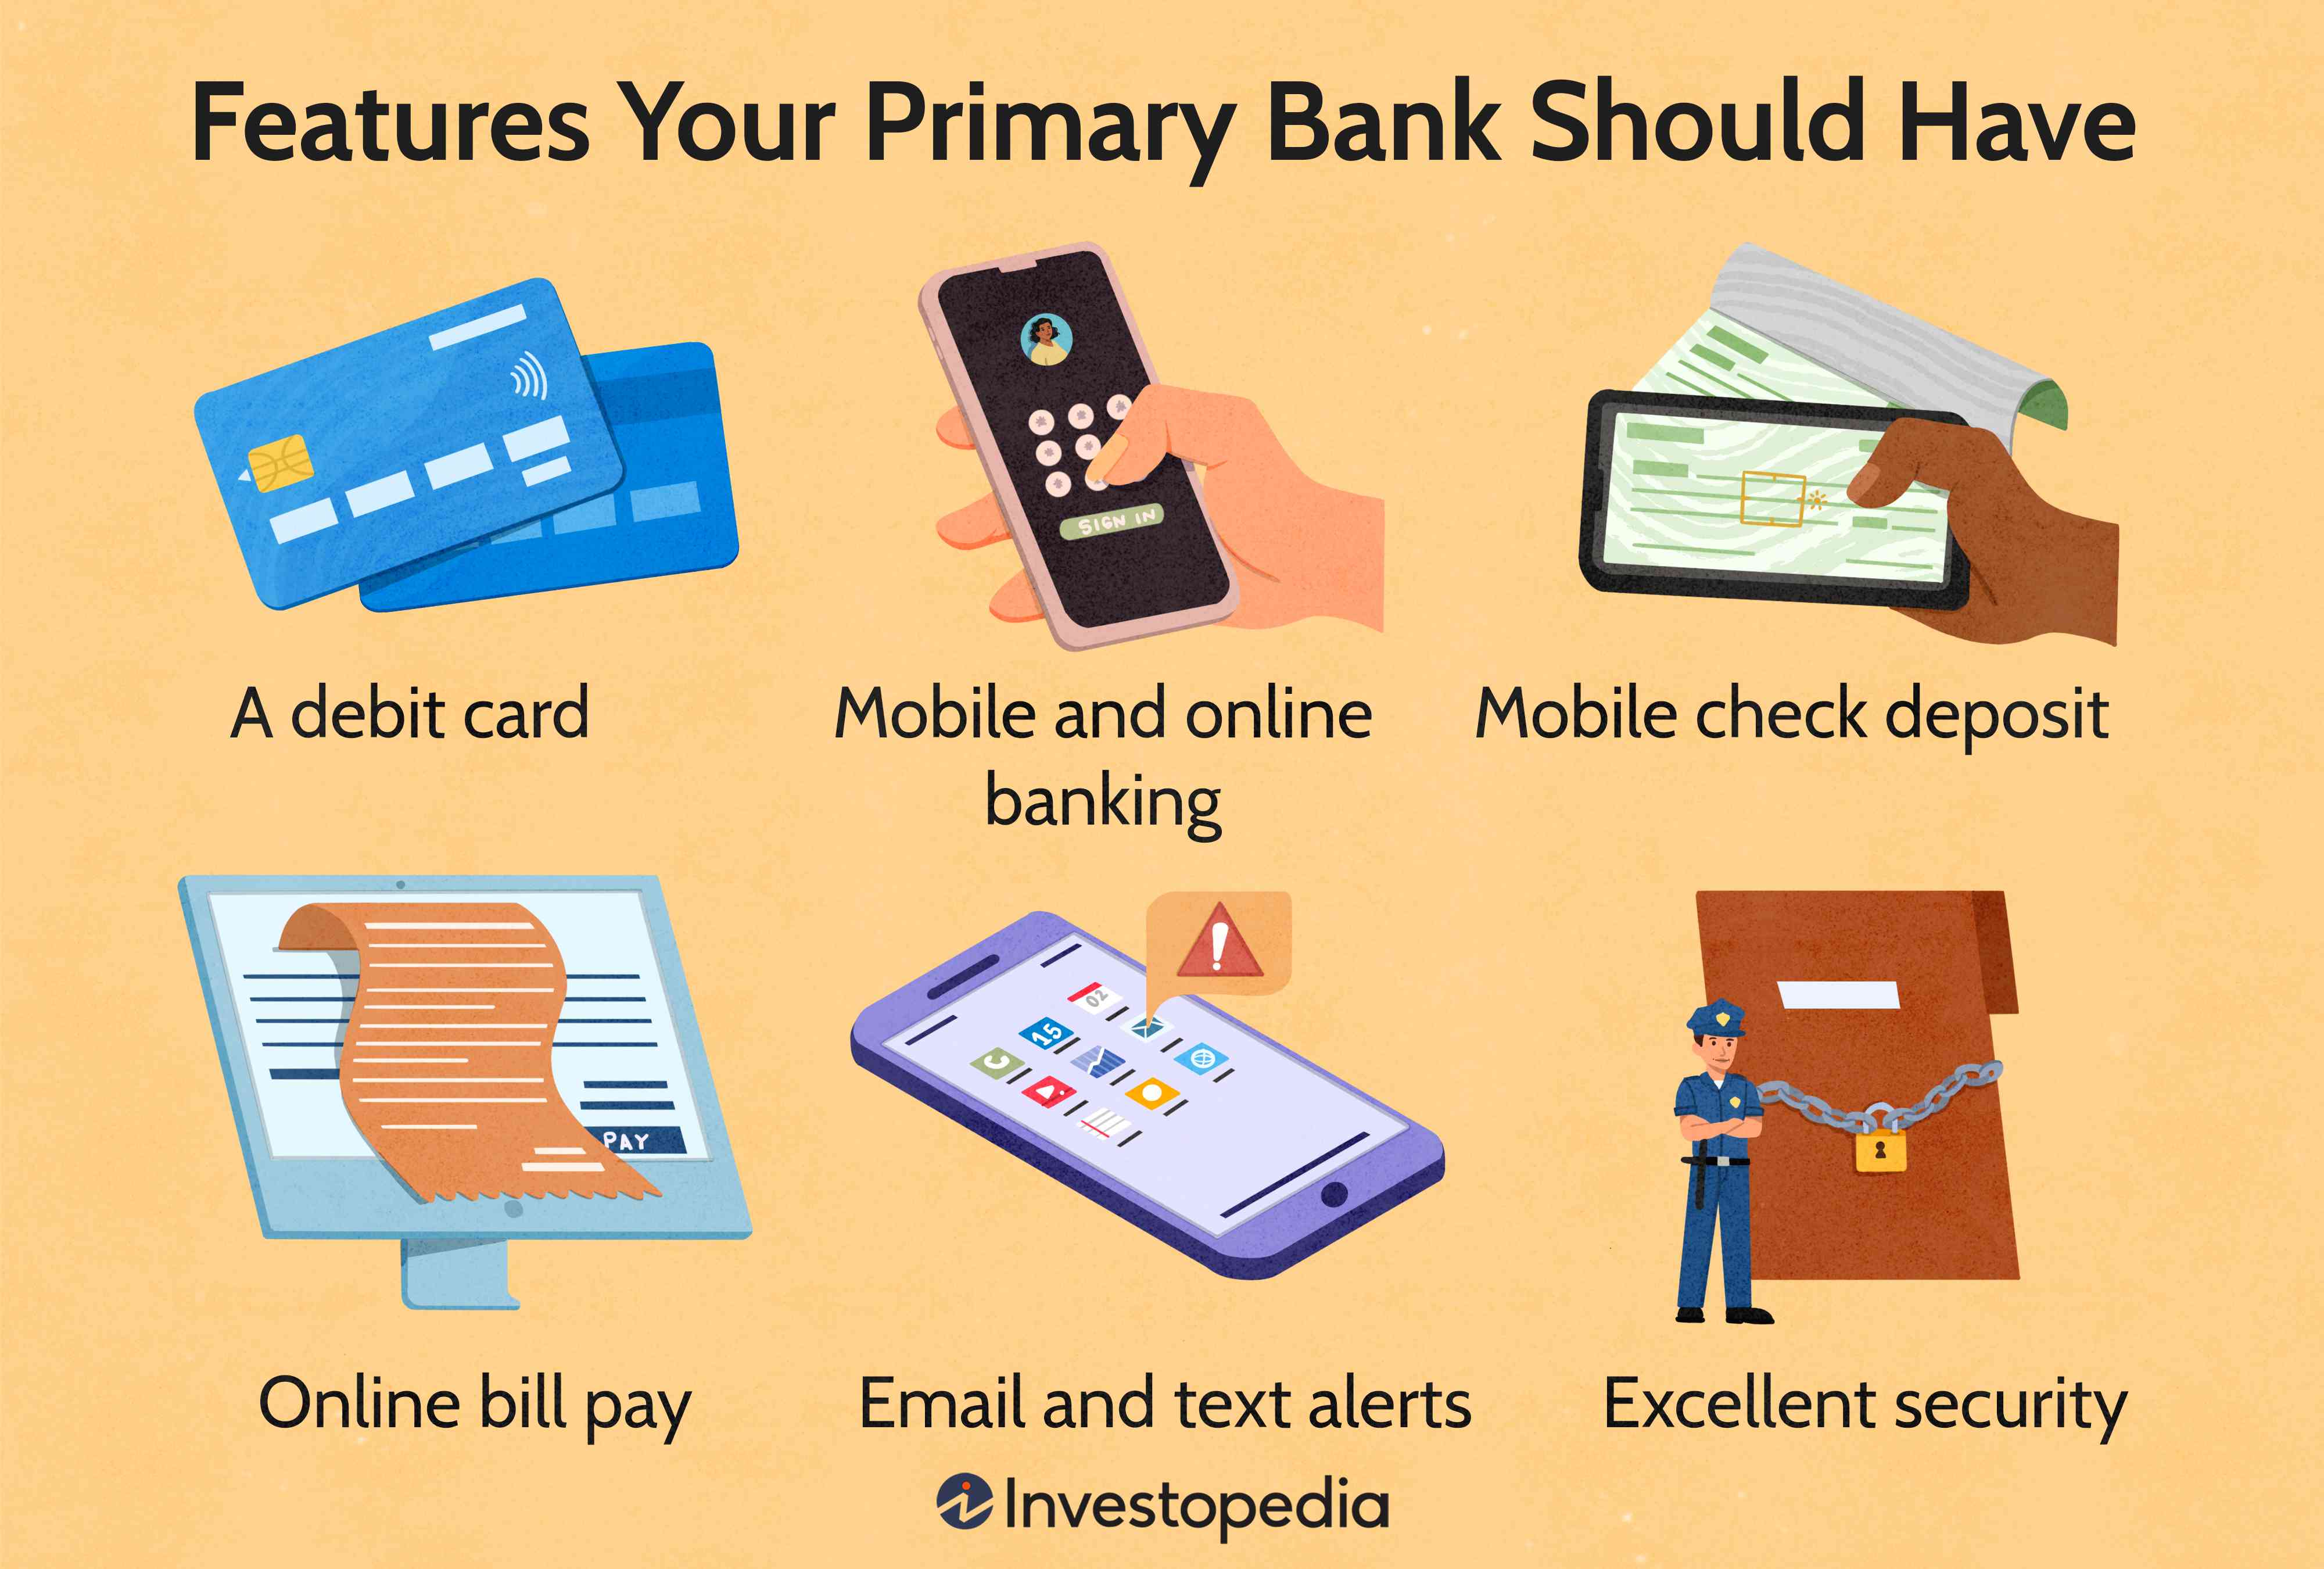 Custom illustration shows debit cards, a hand holding a smartphone, a computer screen, and an envelope with a security guard. Title says "Features Your Primary Bank Should Have, with copy that reads "A debit card, Mobile and online banking, Mobile check deposit, Online bill pay, Email and text alerts, and Excellent security."